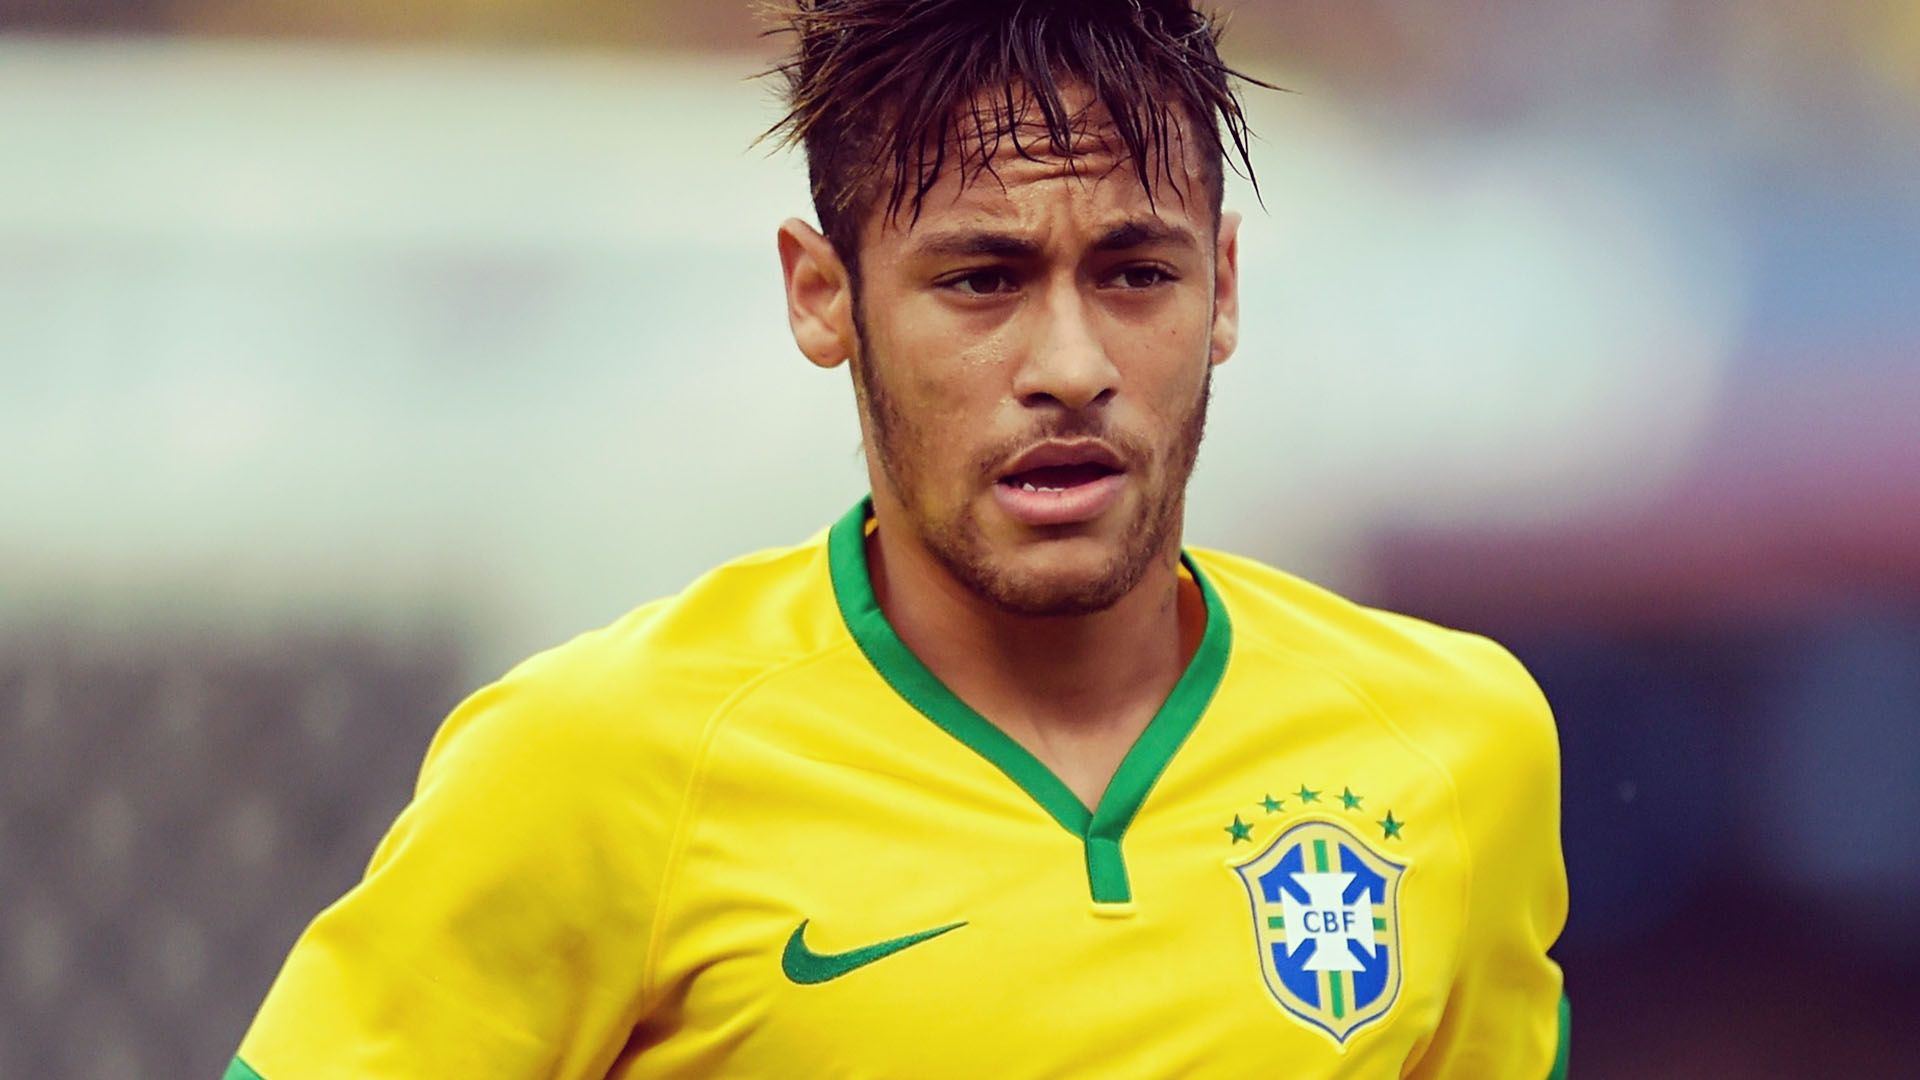 Messi And Neymar Wallpapers - Brazilian Football Player Young - HD Wallpaper 